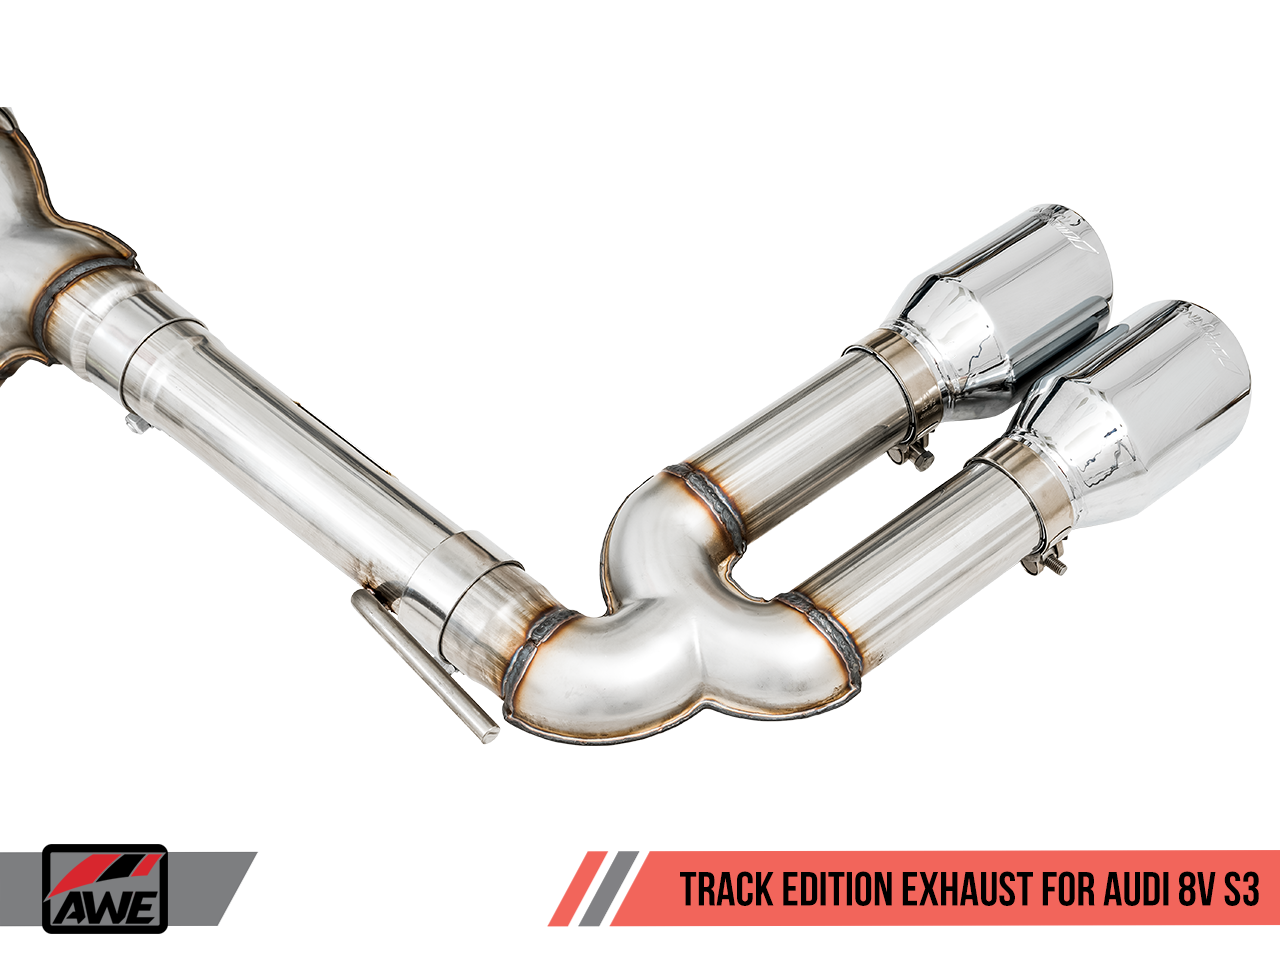 AWE SwitchPath™ Exhaust for Audi 8V S3 - Motorsports LA